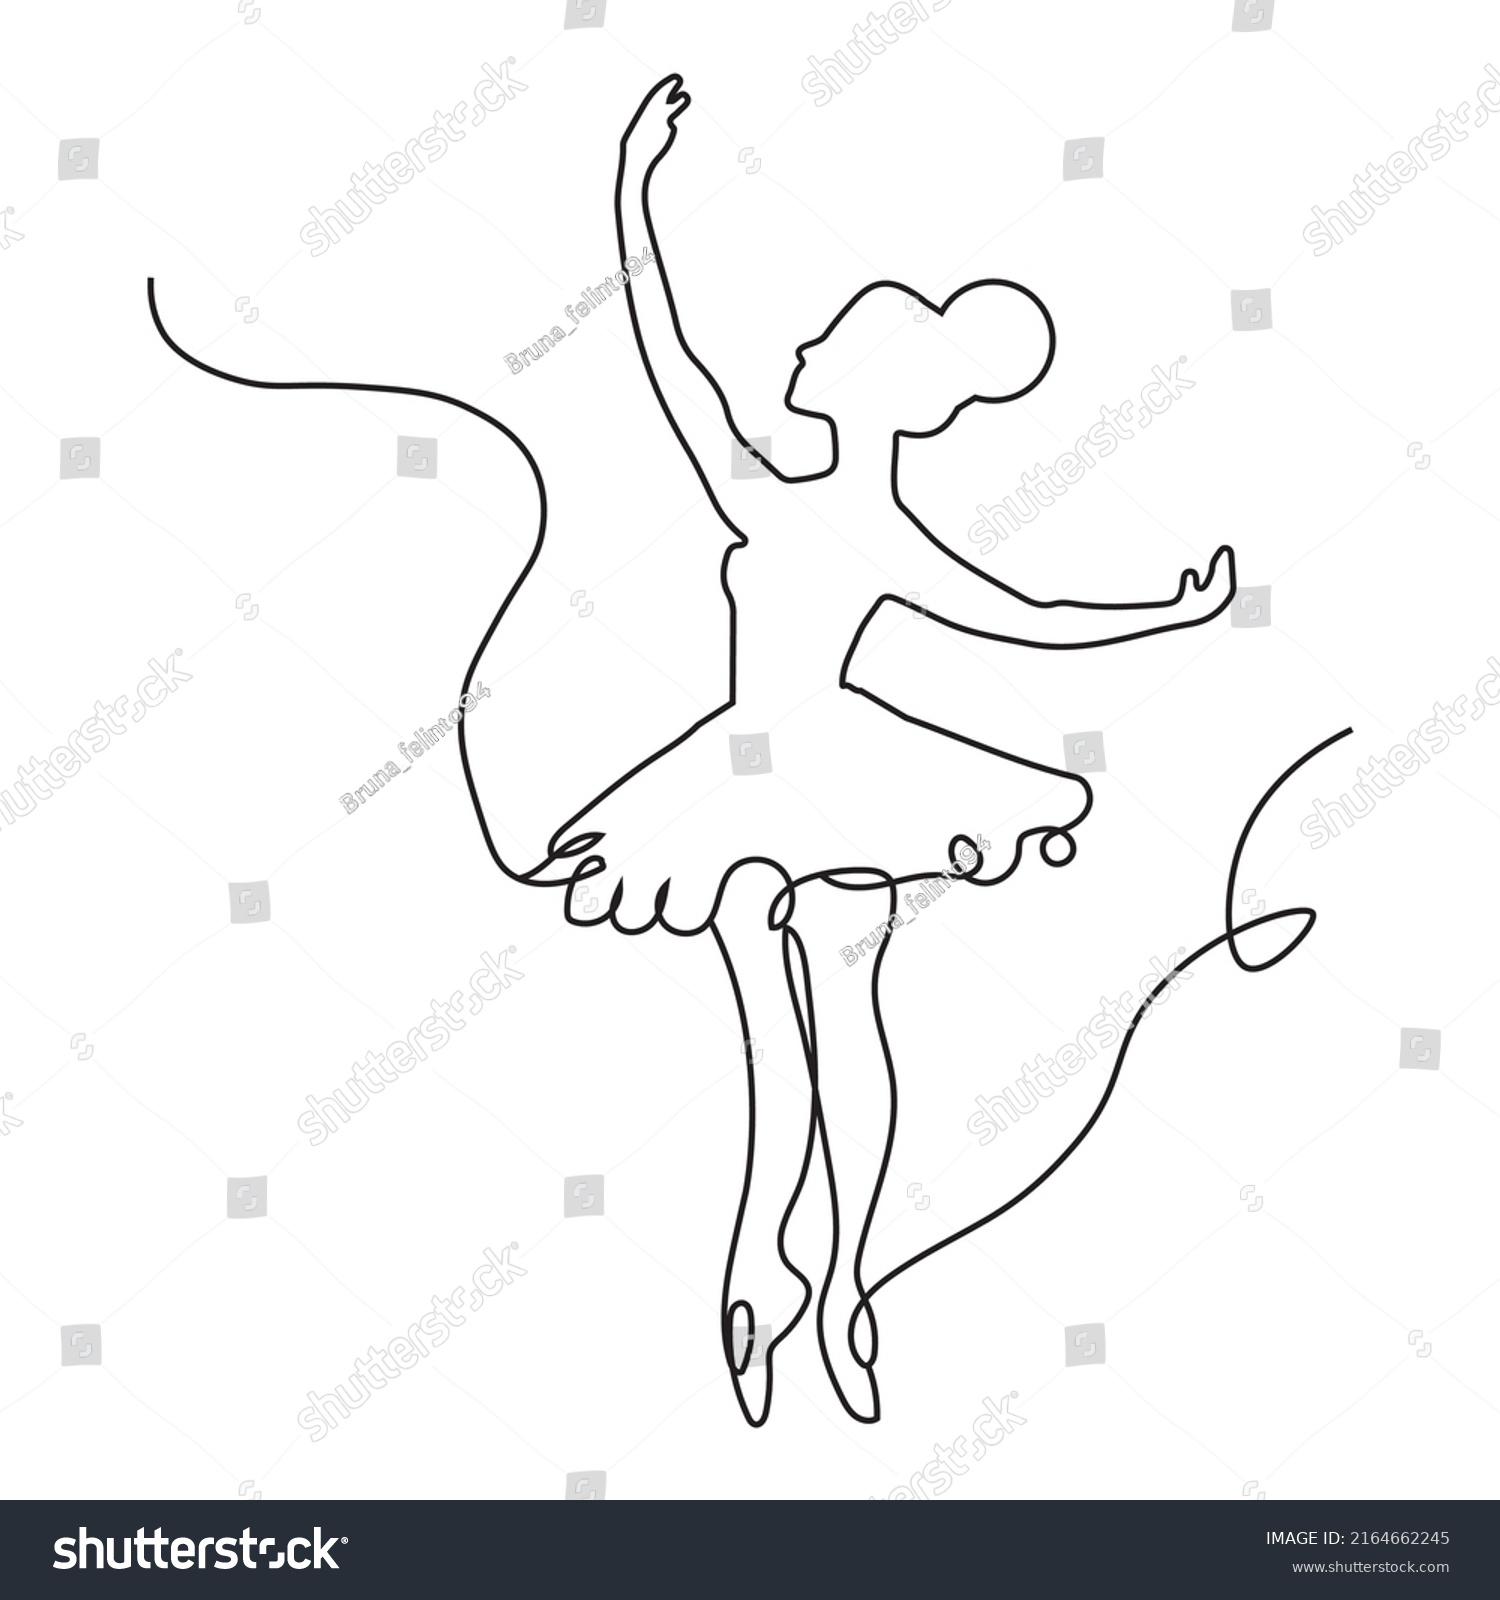 Single Continuous Line Drawing Ballerina Ballet Stock Vector Royalty Free 2164662245 